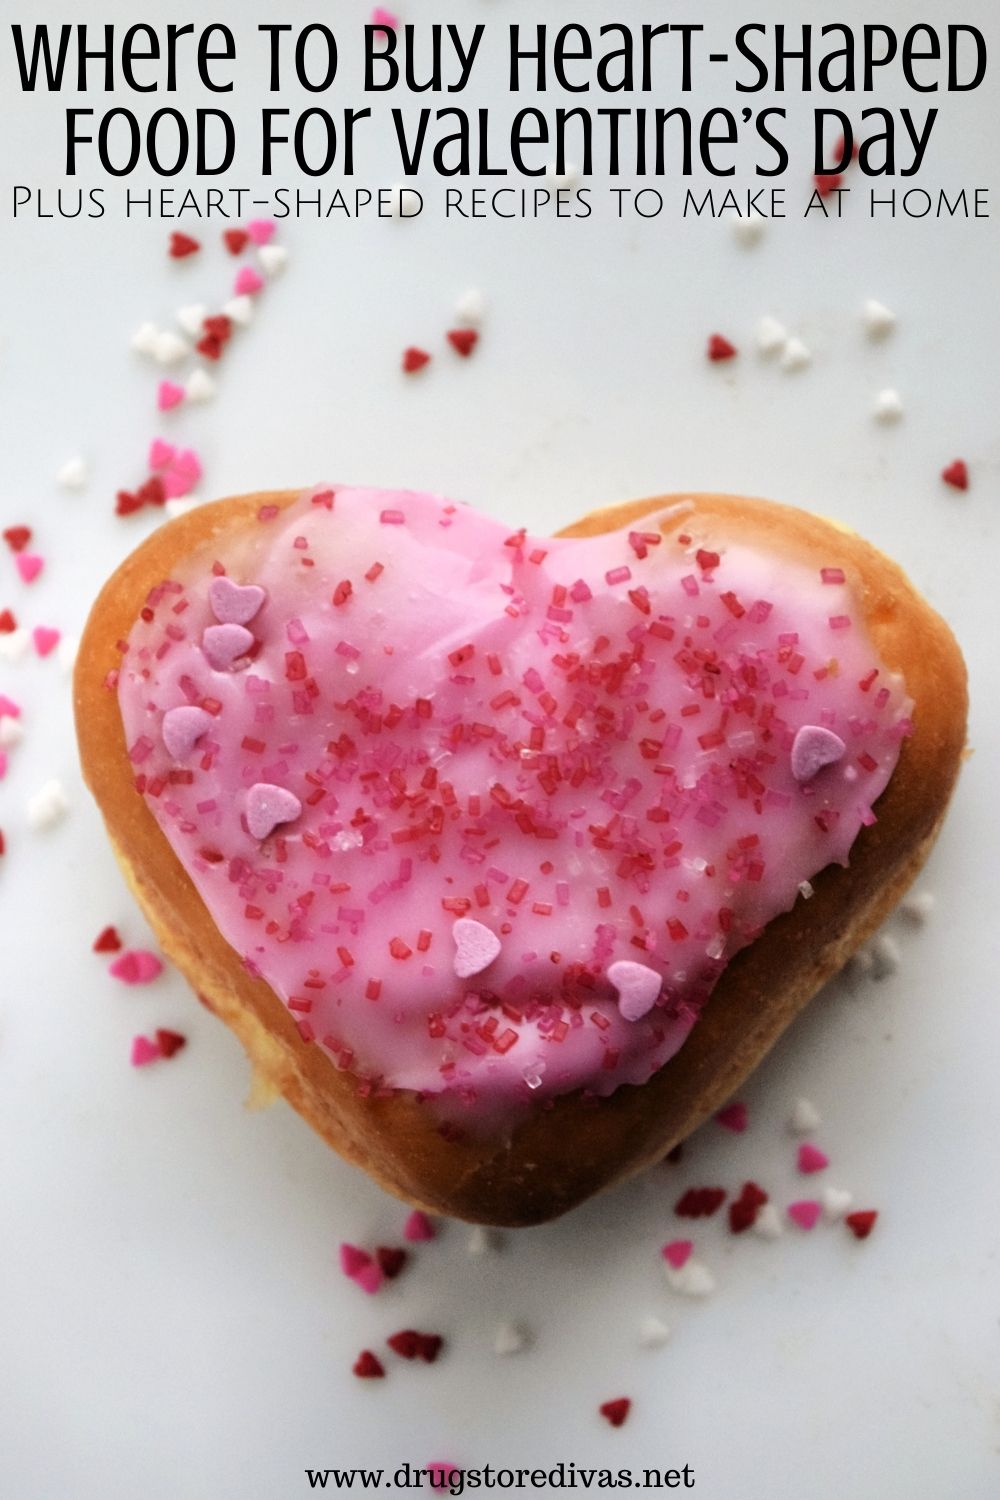 Last minute Valentine's Day meal planning? Check out this list of heart-shaped food you can pick up!